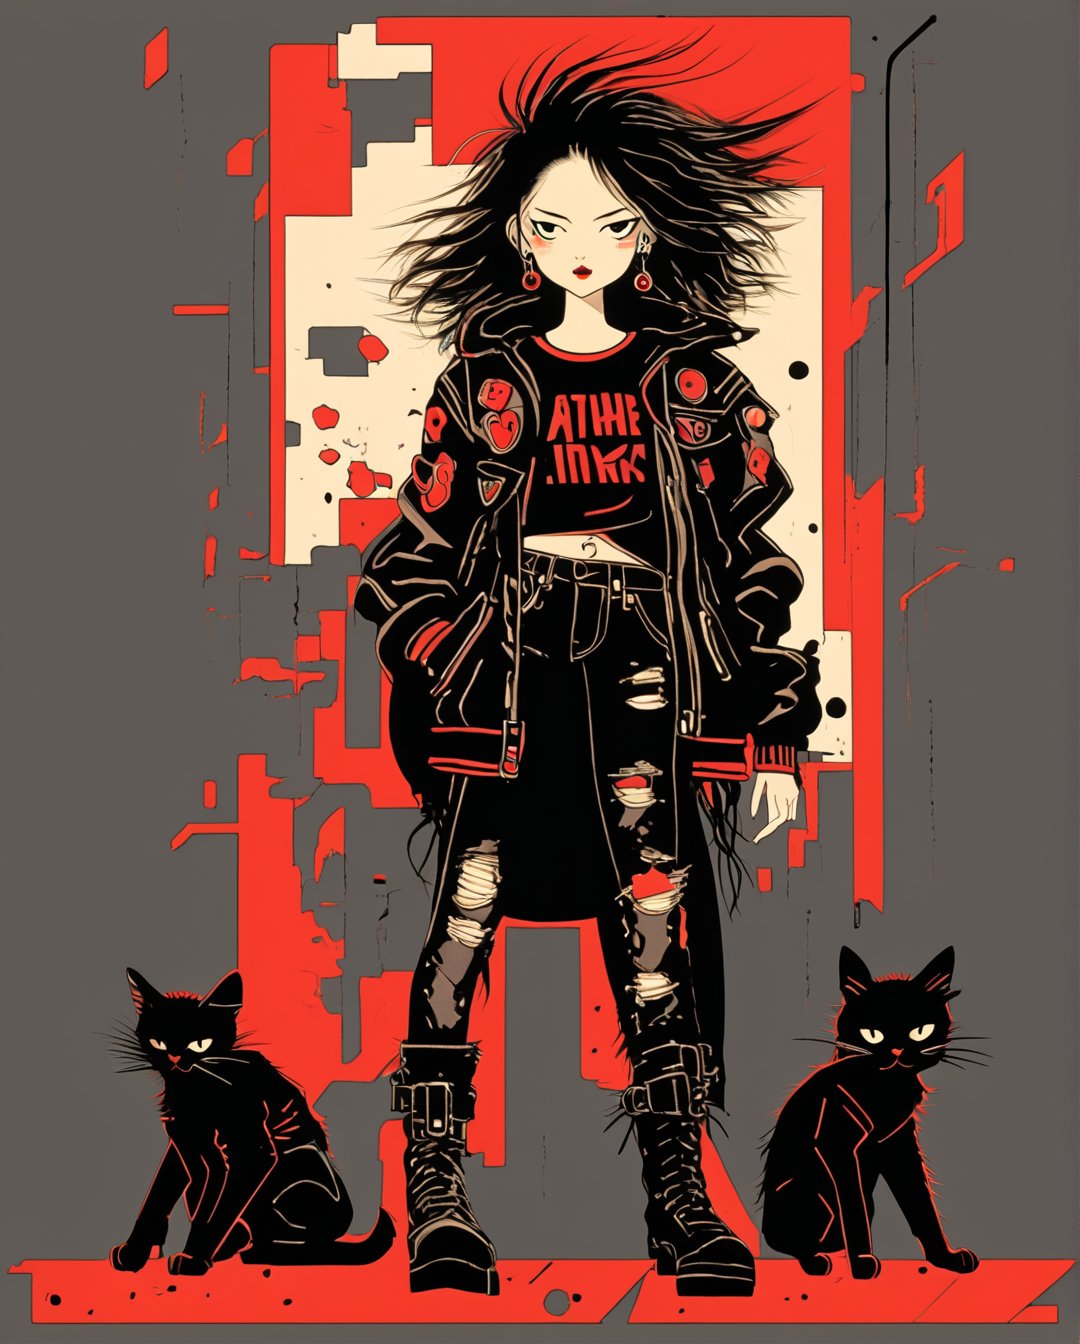 Art style by amano yoshitaka, Female with tan-colored skin, mid-length black hair with red tips, dressed in black ripped jeans with a black t-shirt and a black leather jacket with chrome studs', and black boots.,Anime,aw0k cat,anime,vector